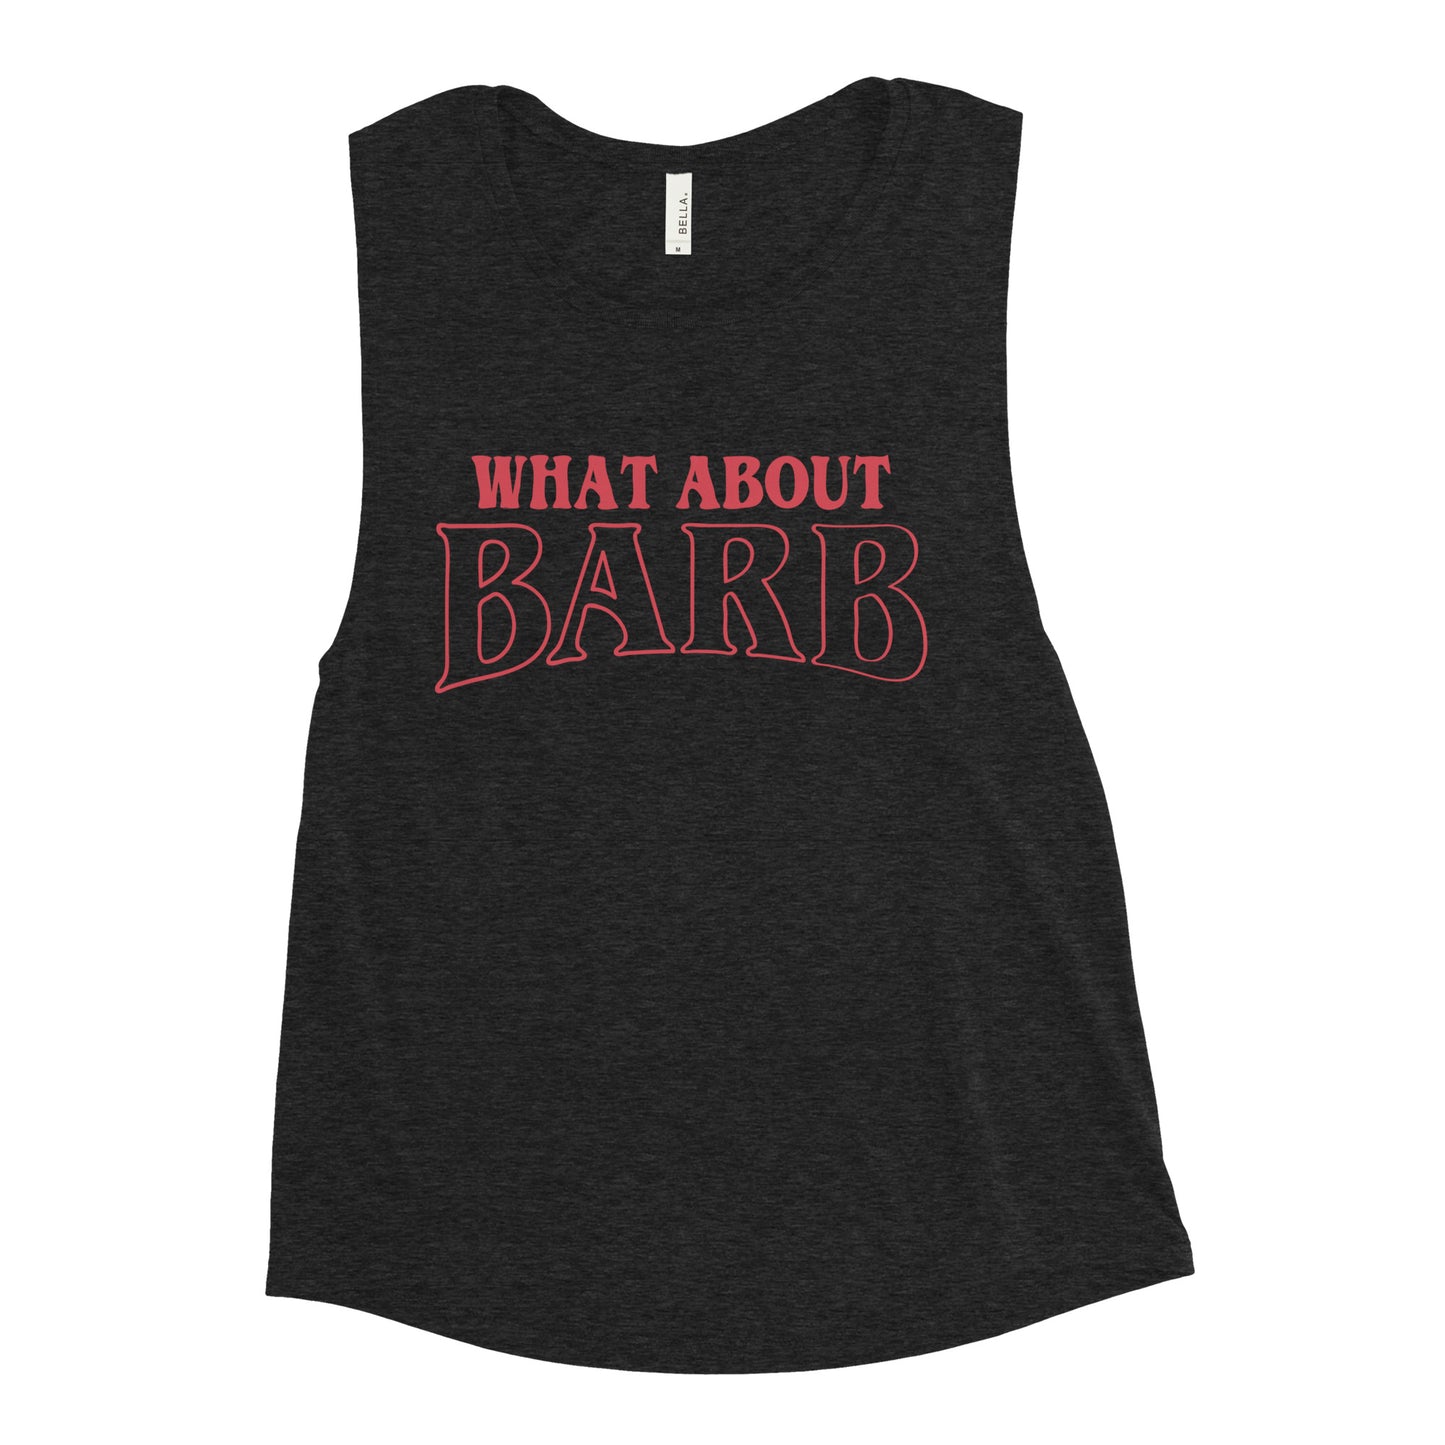 What About Barb? Women's Muscle Tank